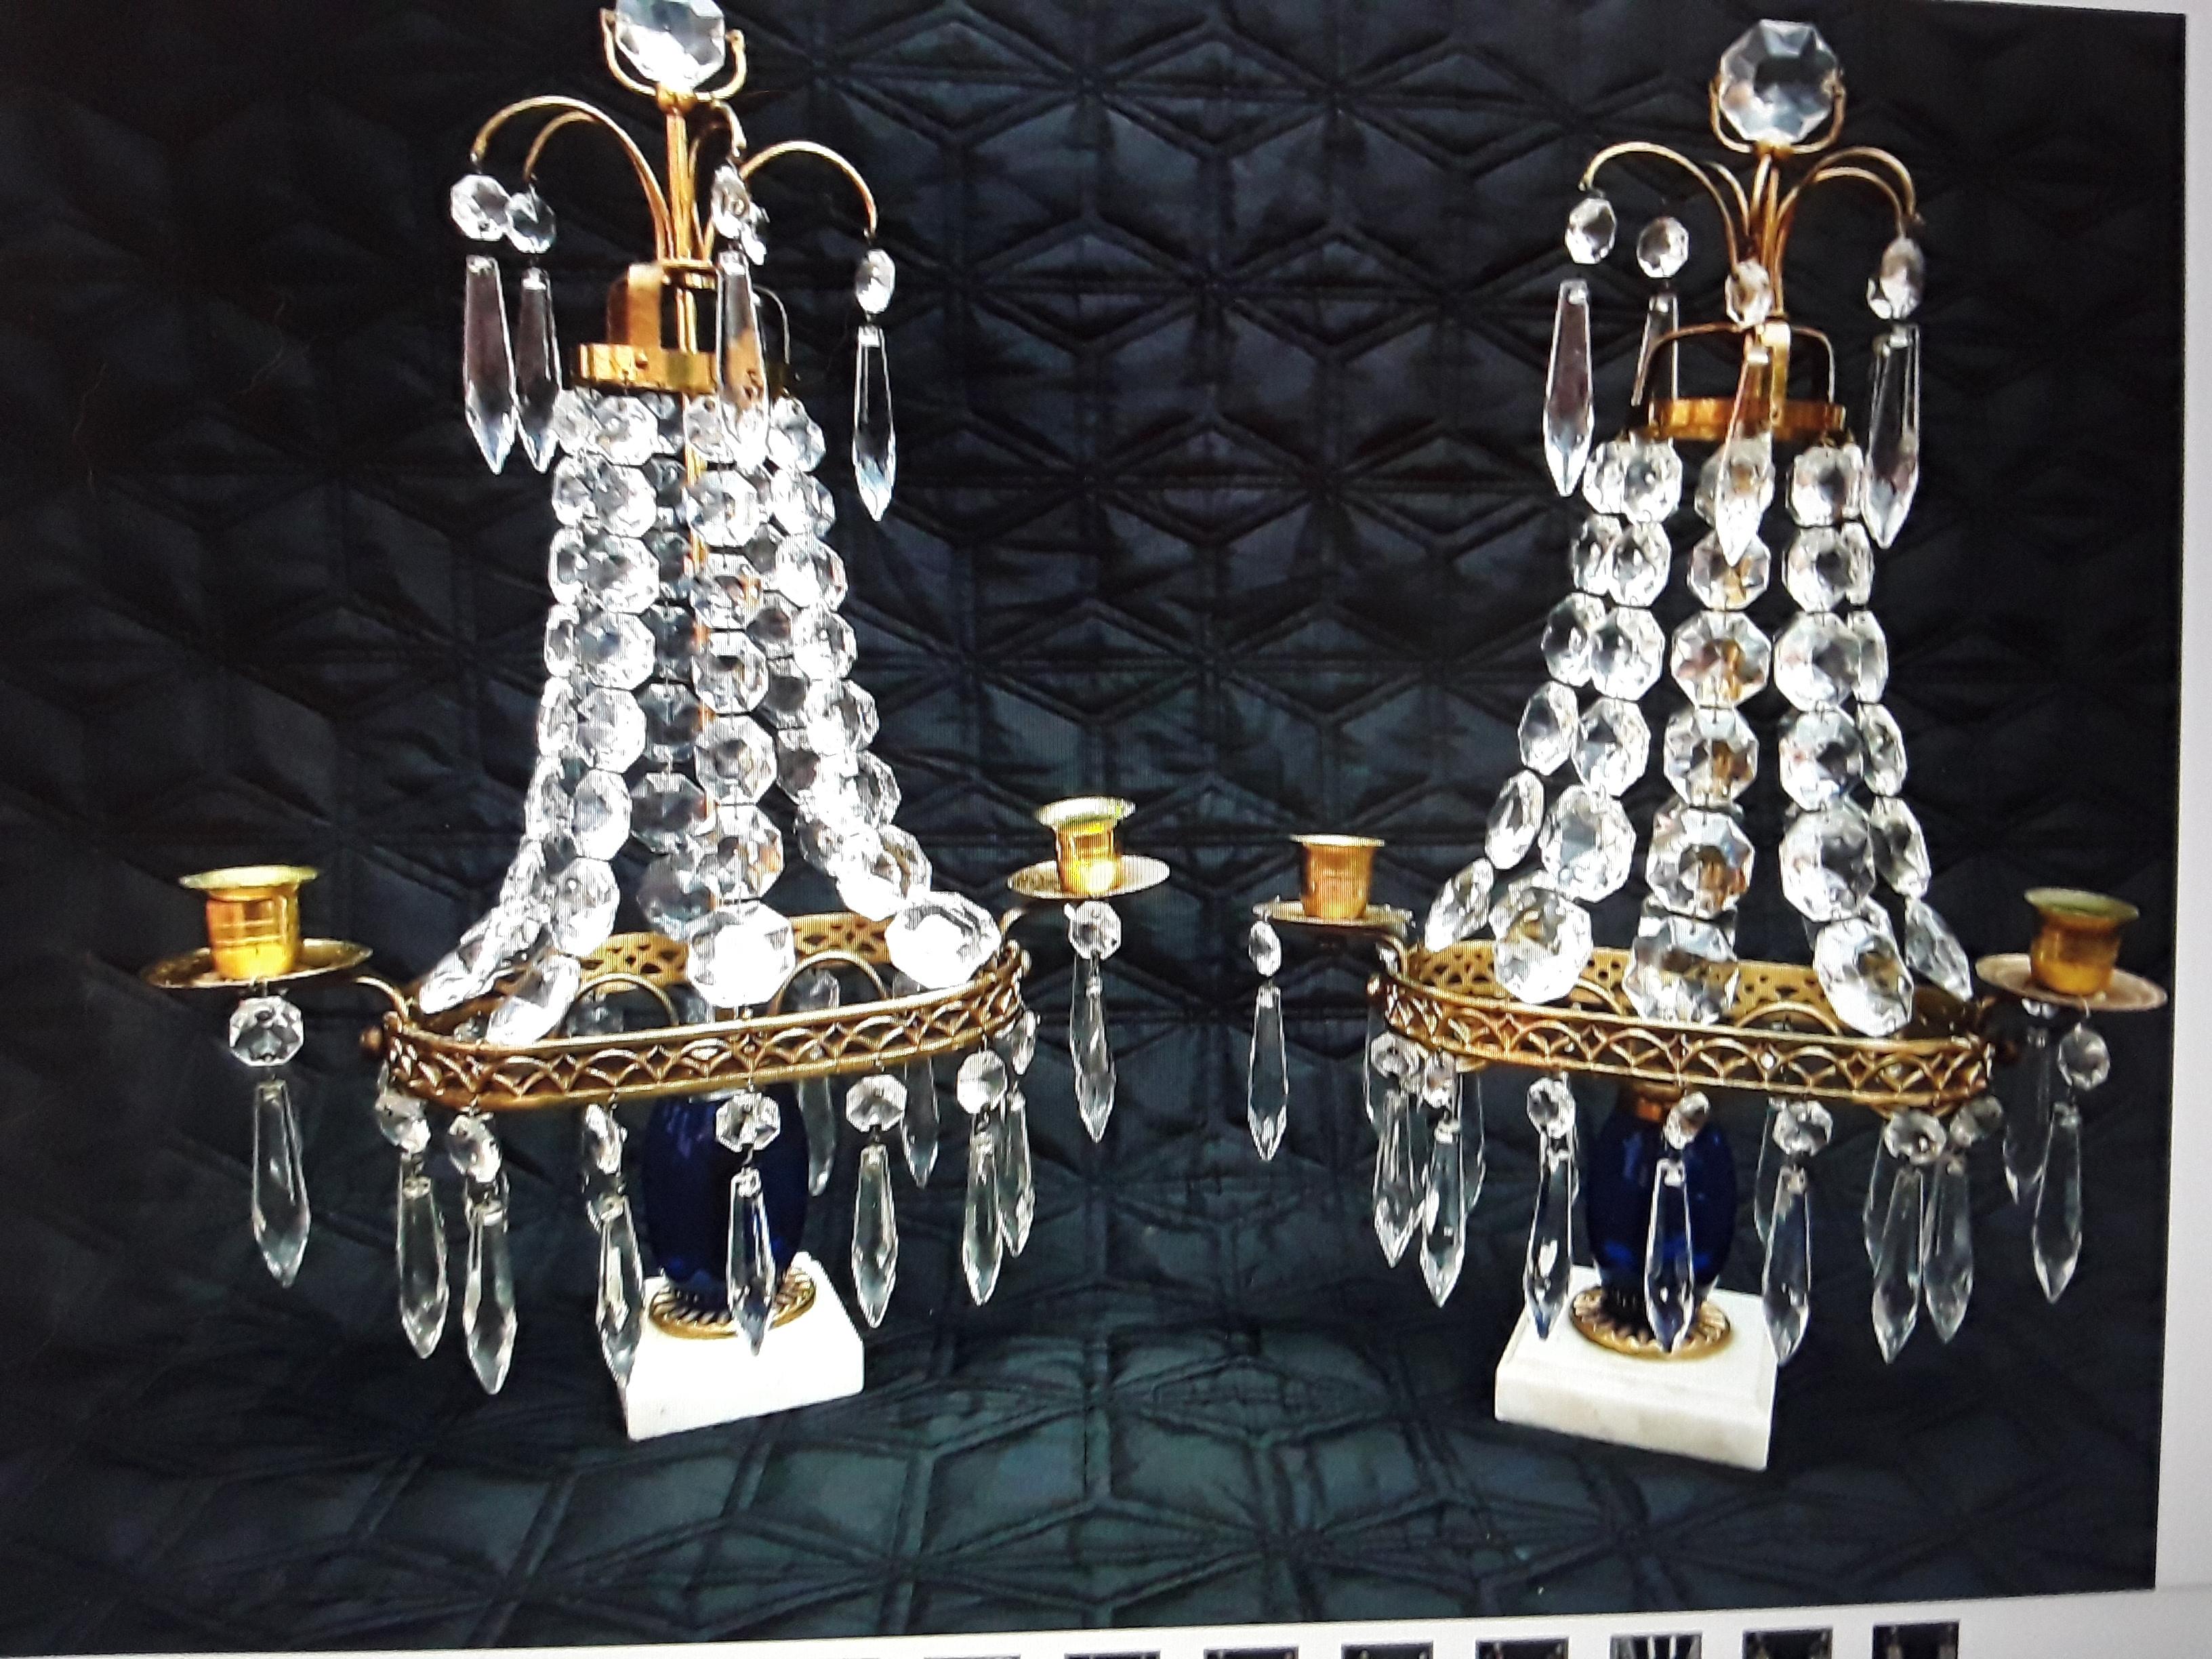 This pair is unique for  sure! Marble plinth with a blue art glass cylinders issuing cut Crystal Chains in Descending sizes. Brass filigree bordered. The whole is absolutely beaautiful in its unelectrified original state.